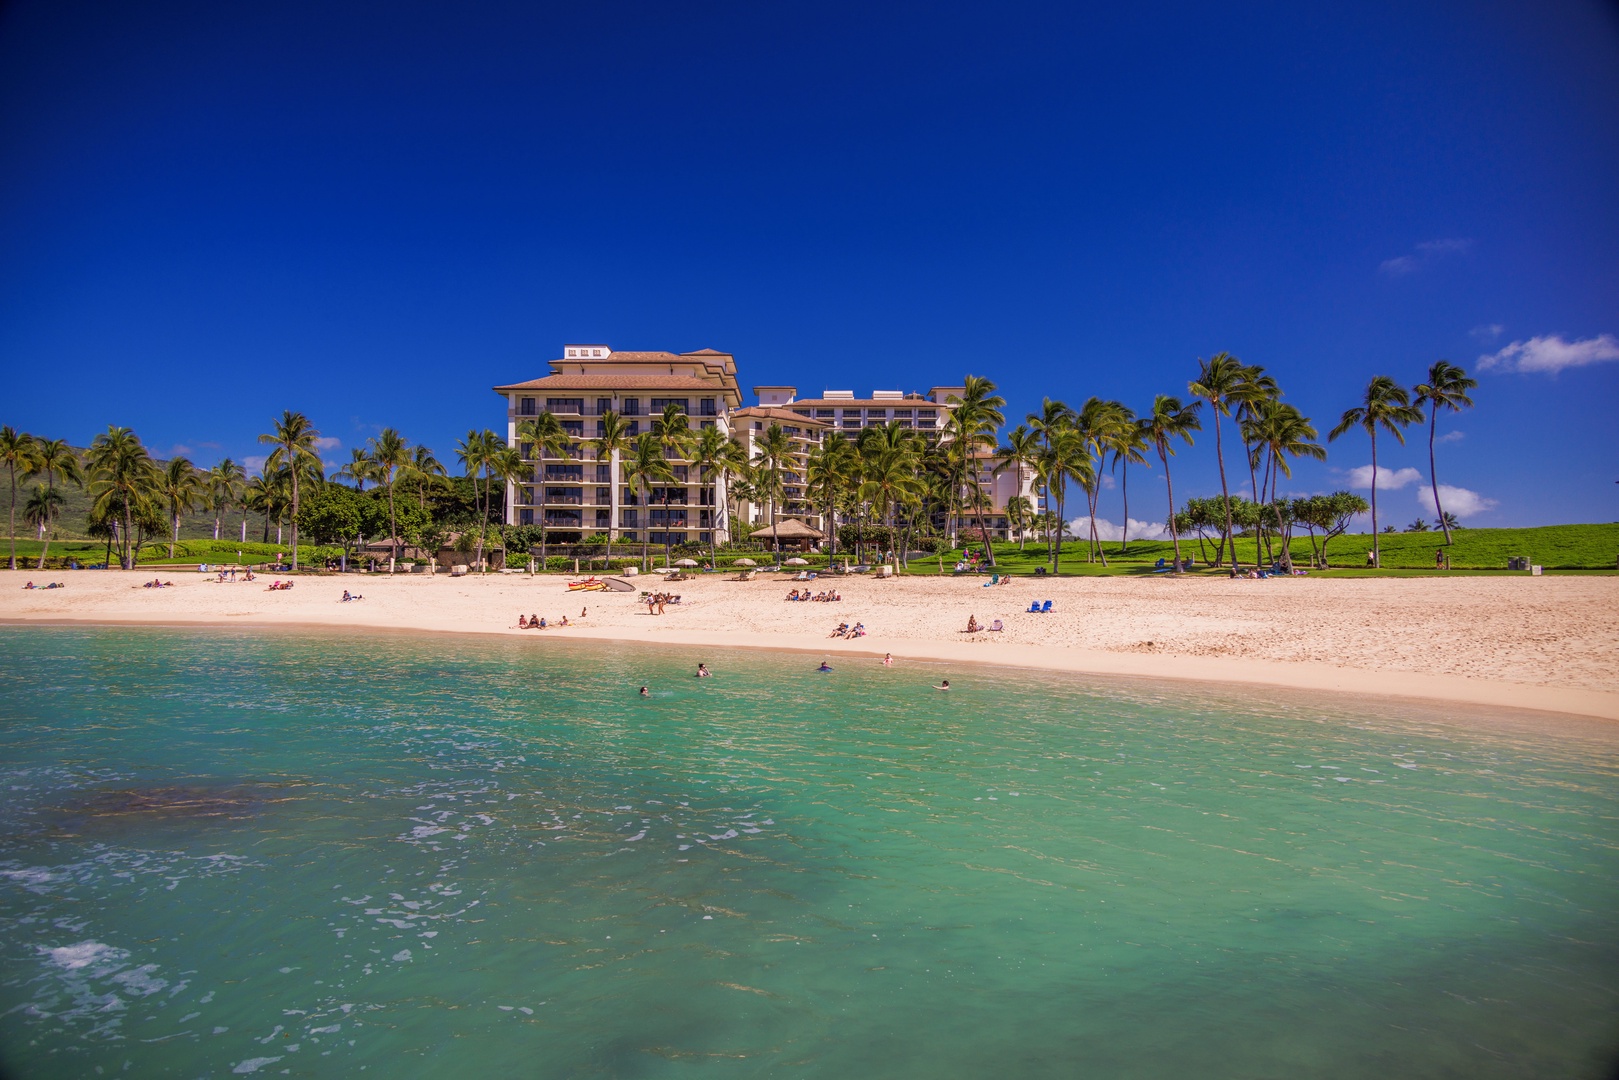 Kapolei Vacation Rentals, Ko Olina Kai 1065E - Ko Olina's private lagoons with soft sands and crystal blue water, perfect for afternoon swim or spectacular views.